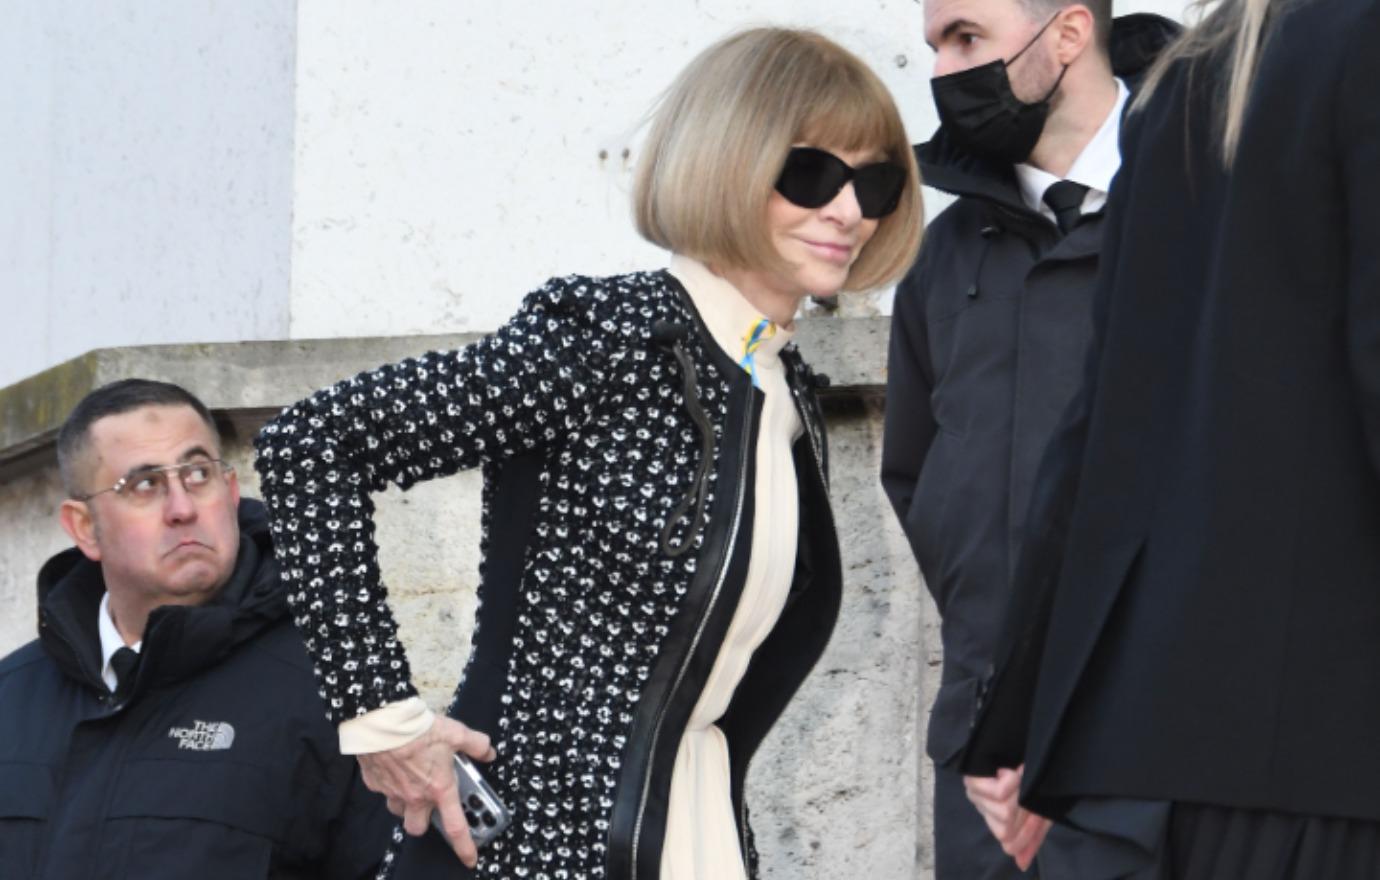 Mind-Numbingly' Curt Anna Wintour Labelled Power-Hungry, Fired Friend